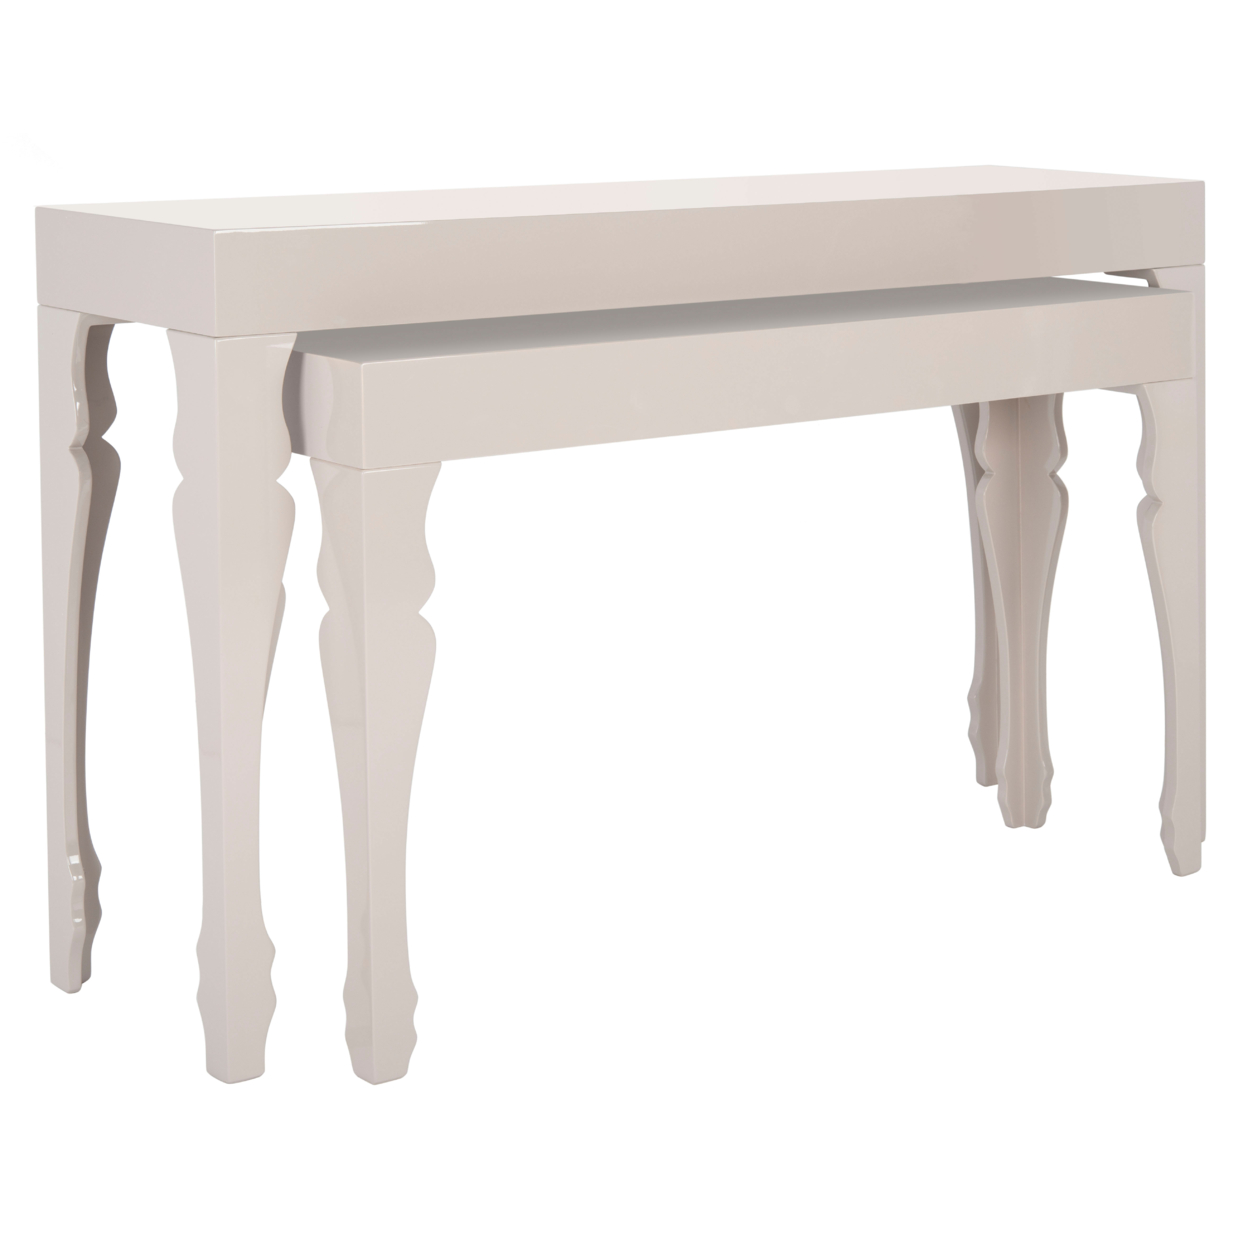 SAFAVIEH Beth French Leg Lacquer Stacking Console Table Taupe